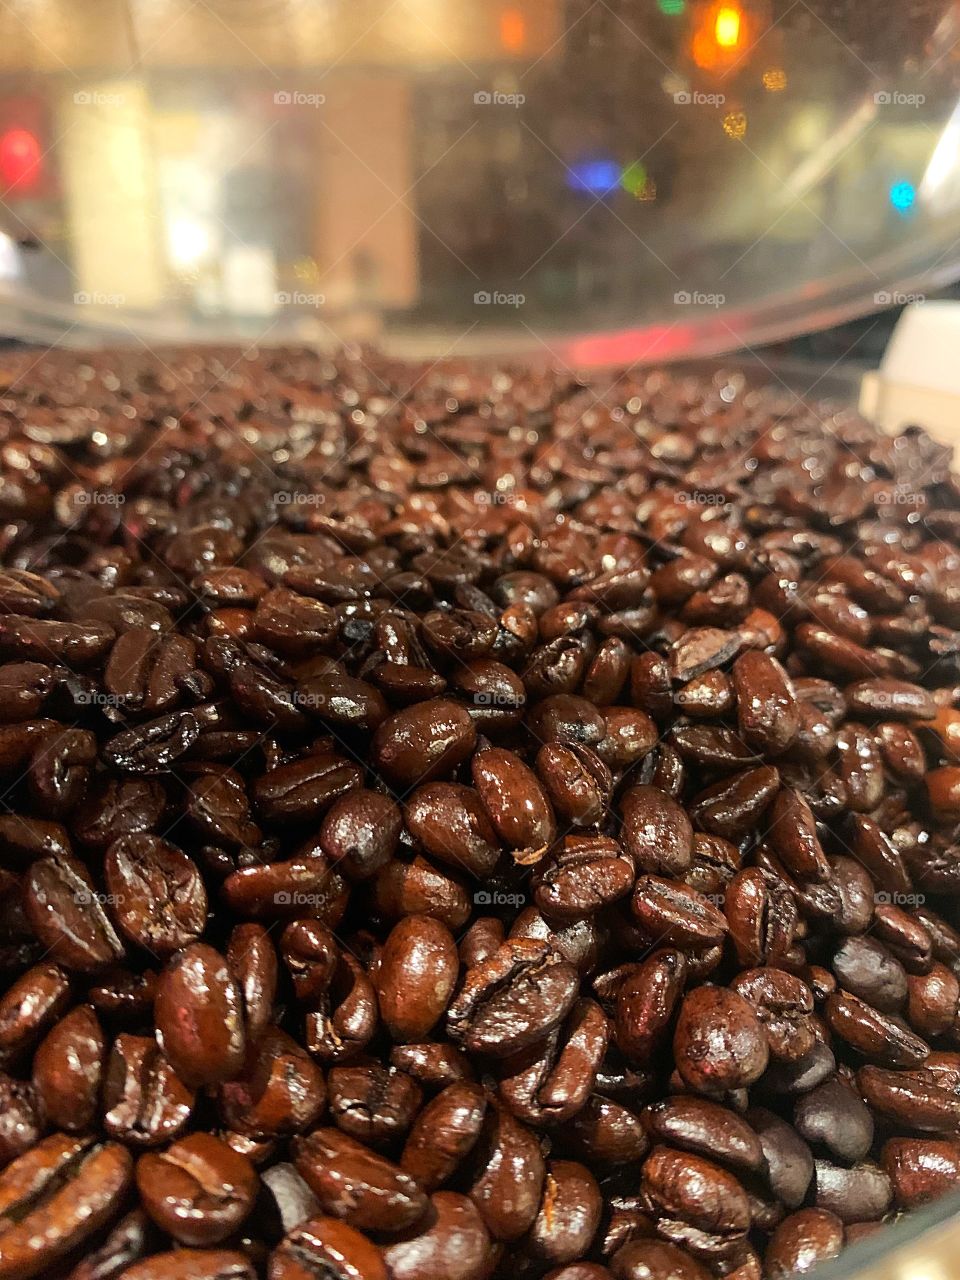 Filling my beans for business ☕️